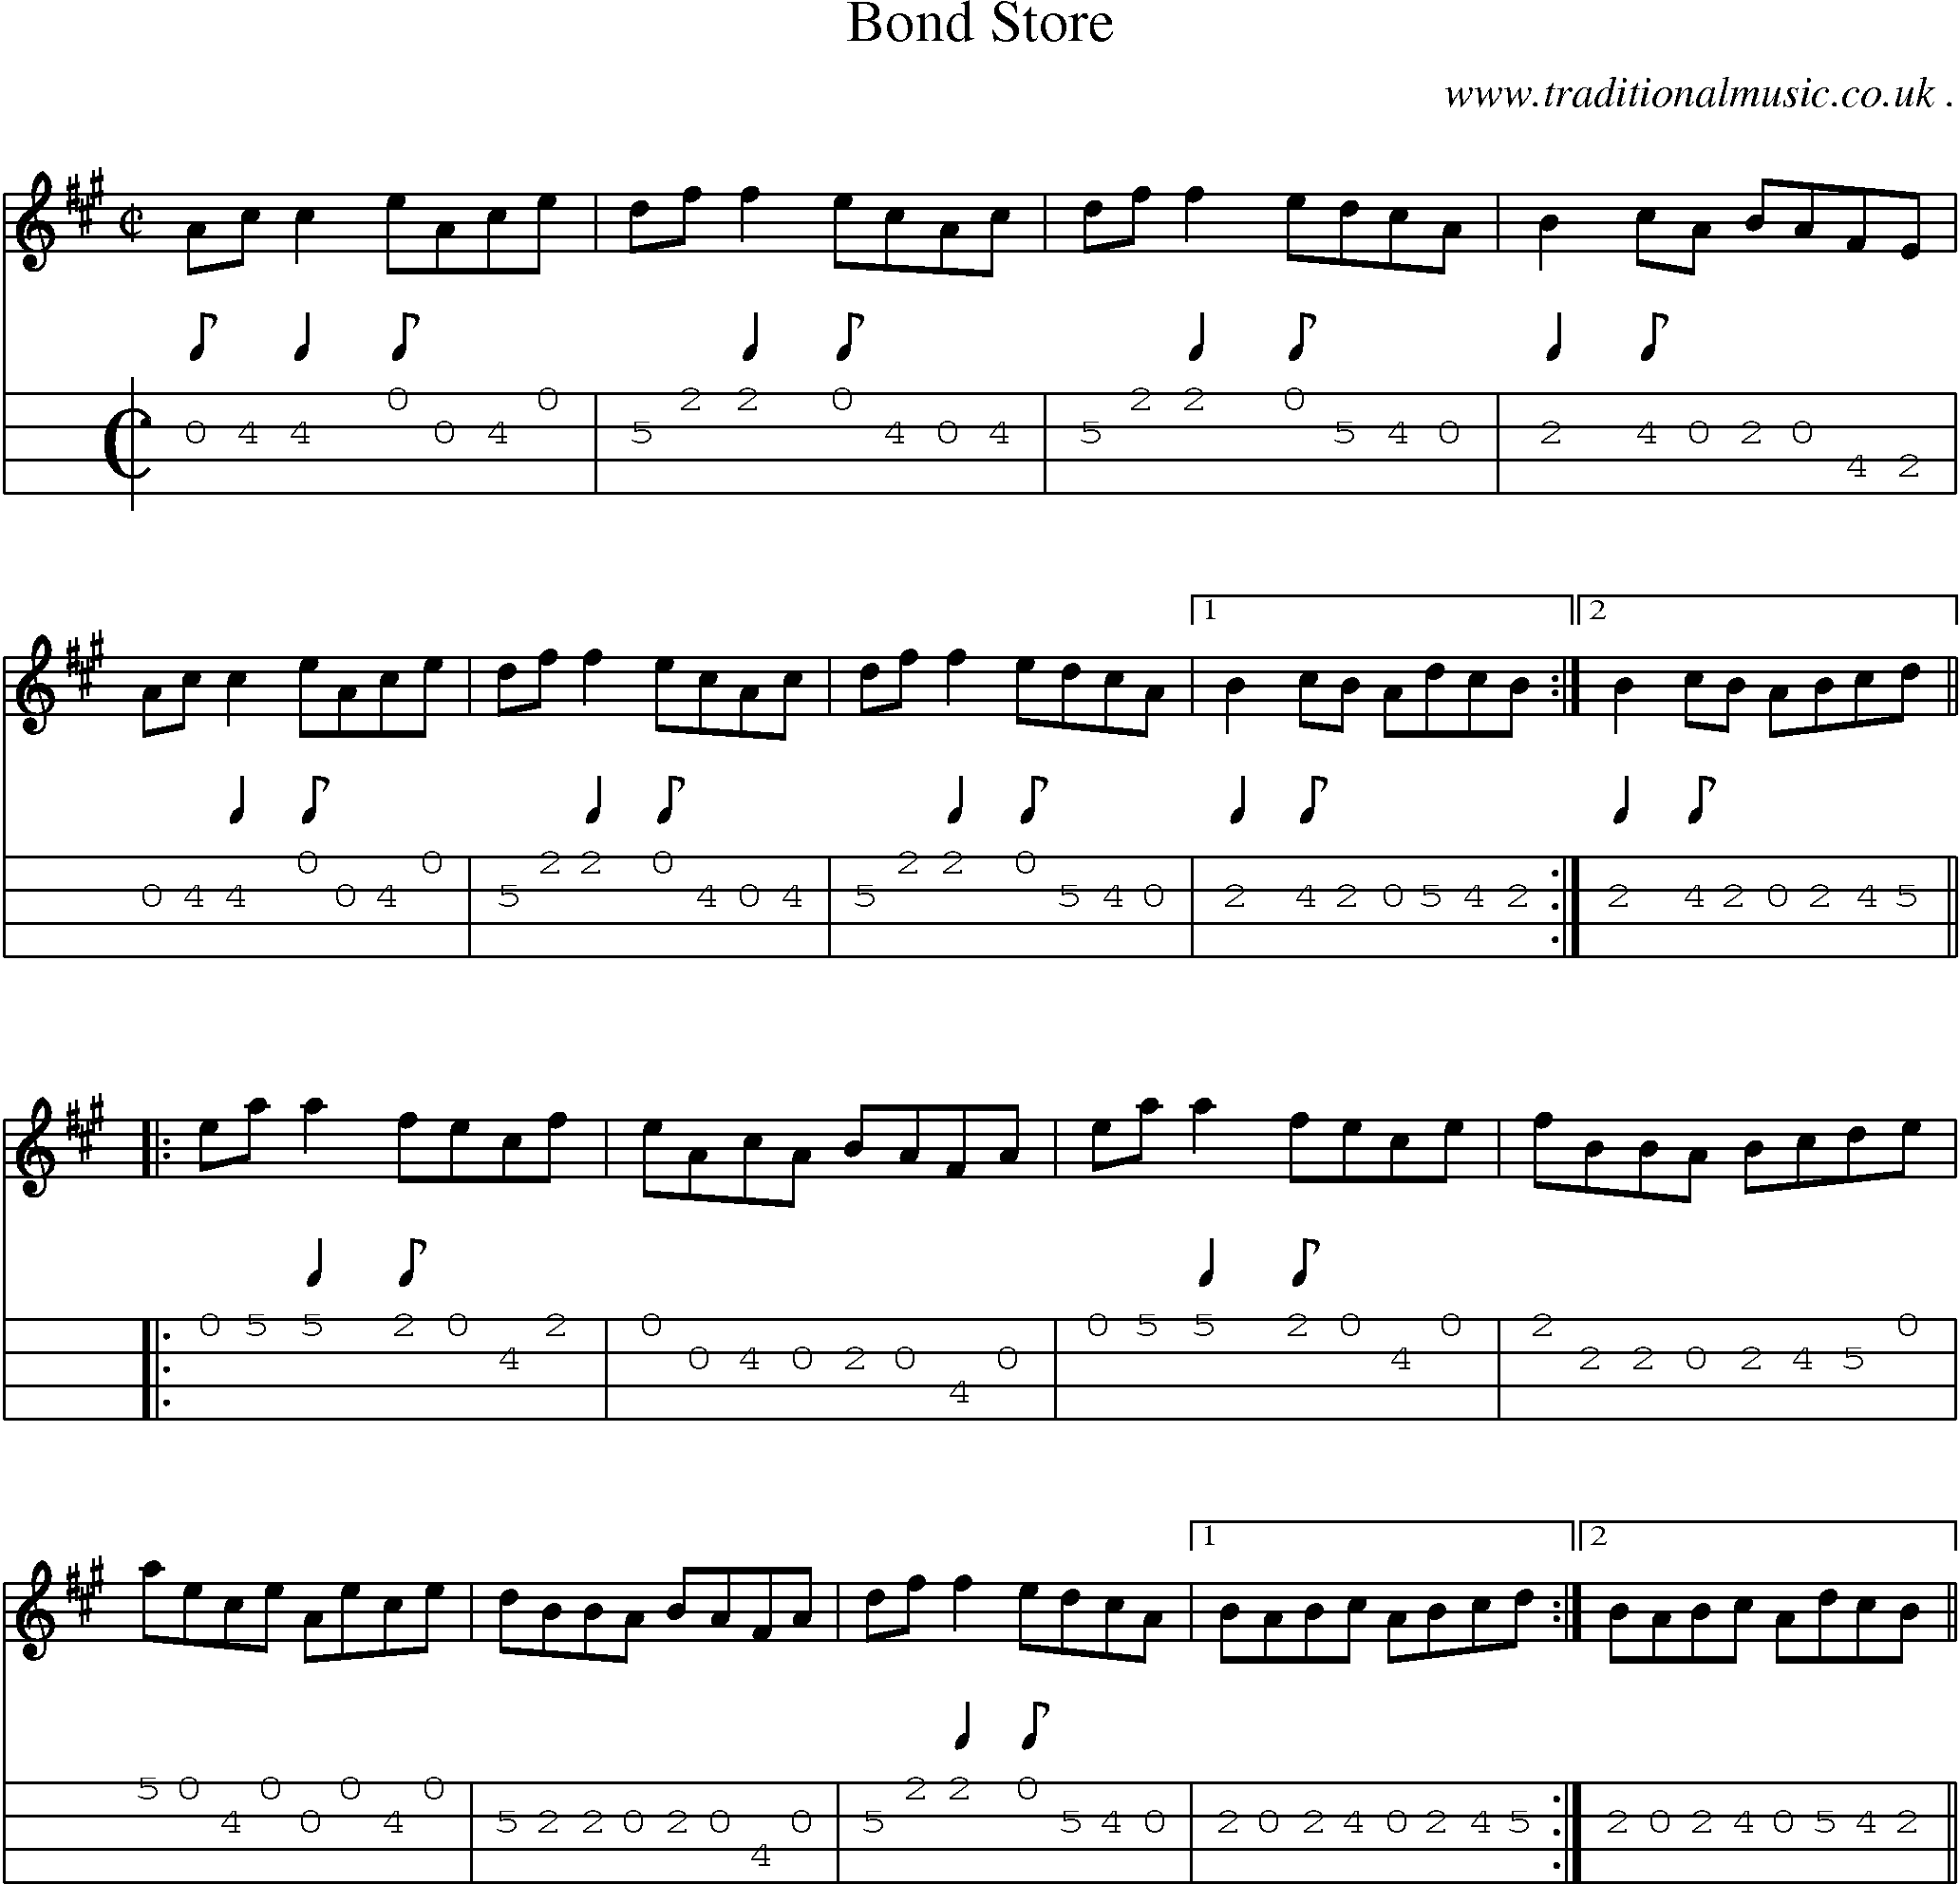 Sheet-Music and Mandolin Tabs for Bond Store